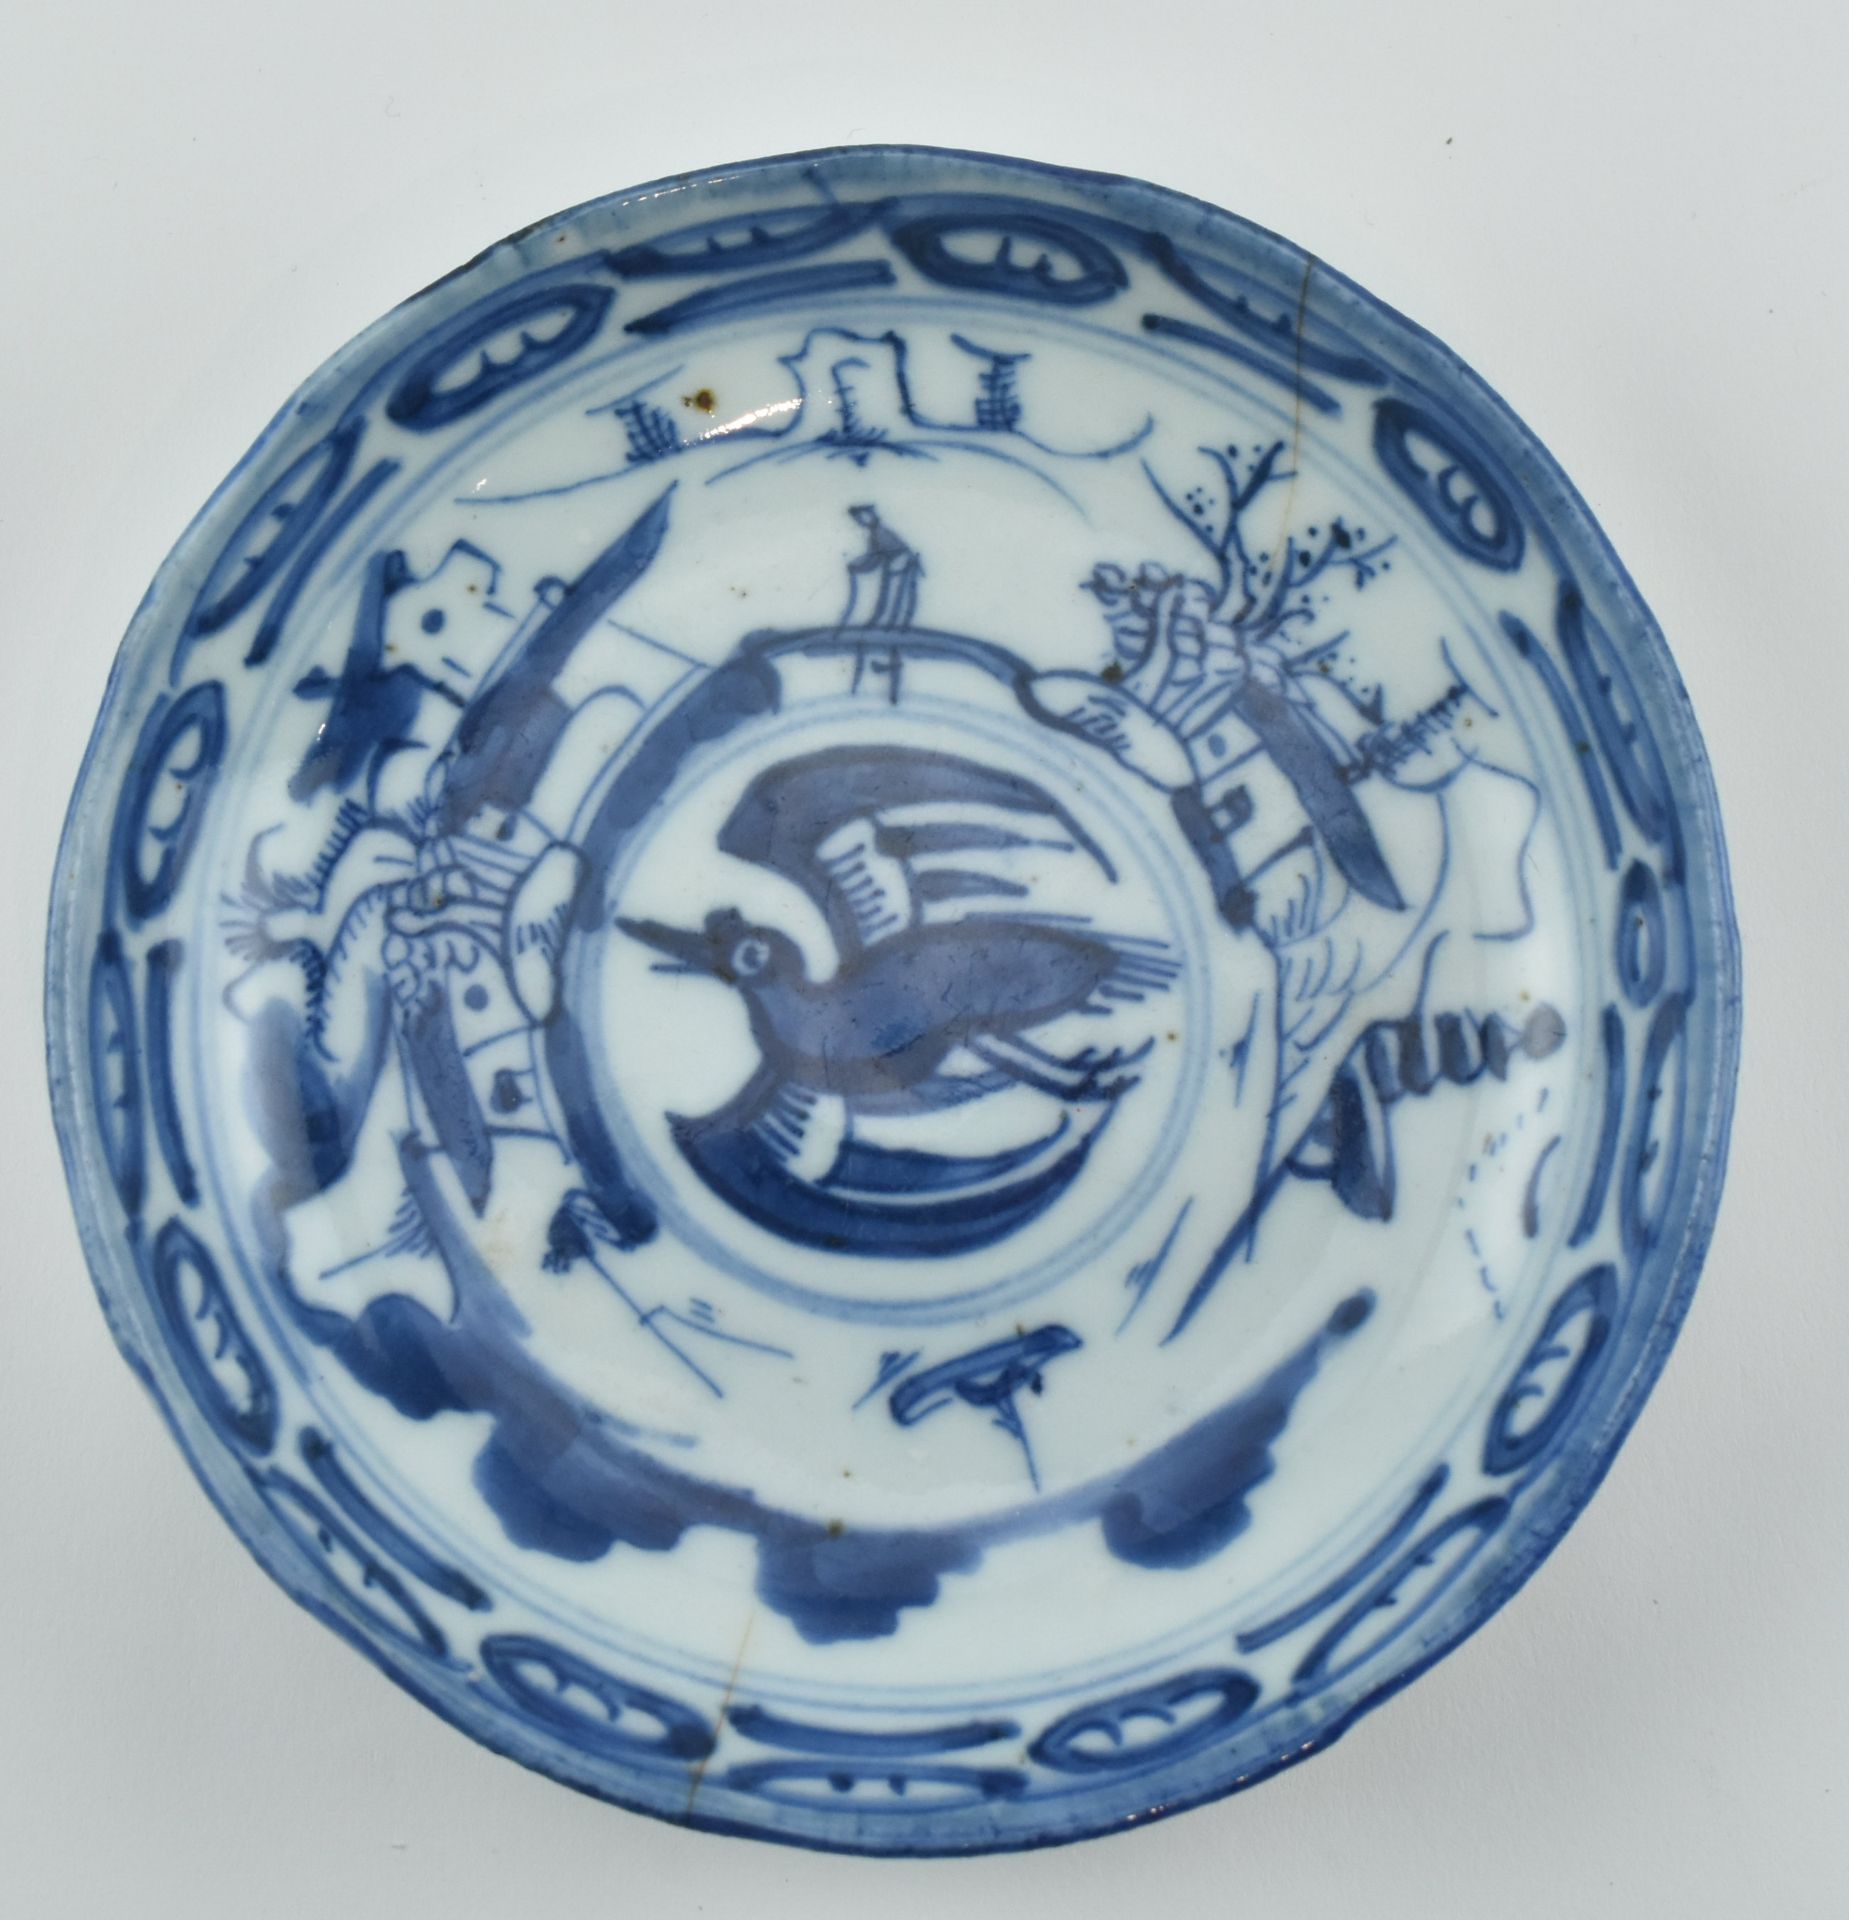 QING DAOGUANG BLUE AND WHITE PLATE 清 道光 青花山水盘 - Image 2 of 8